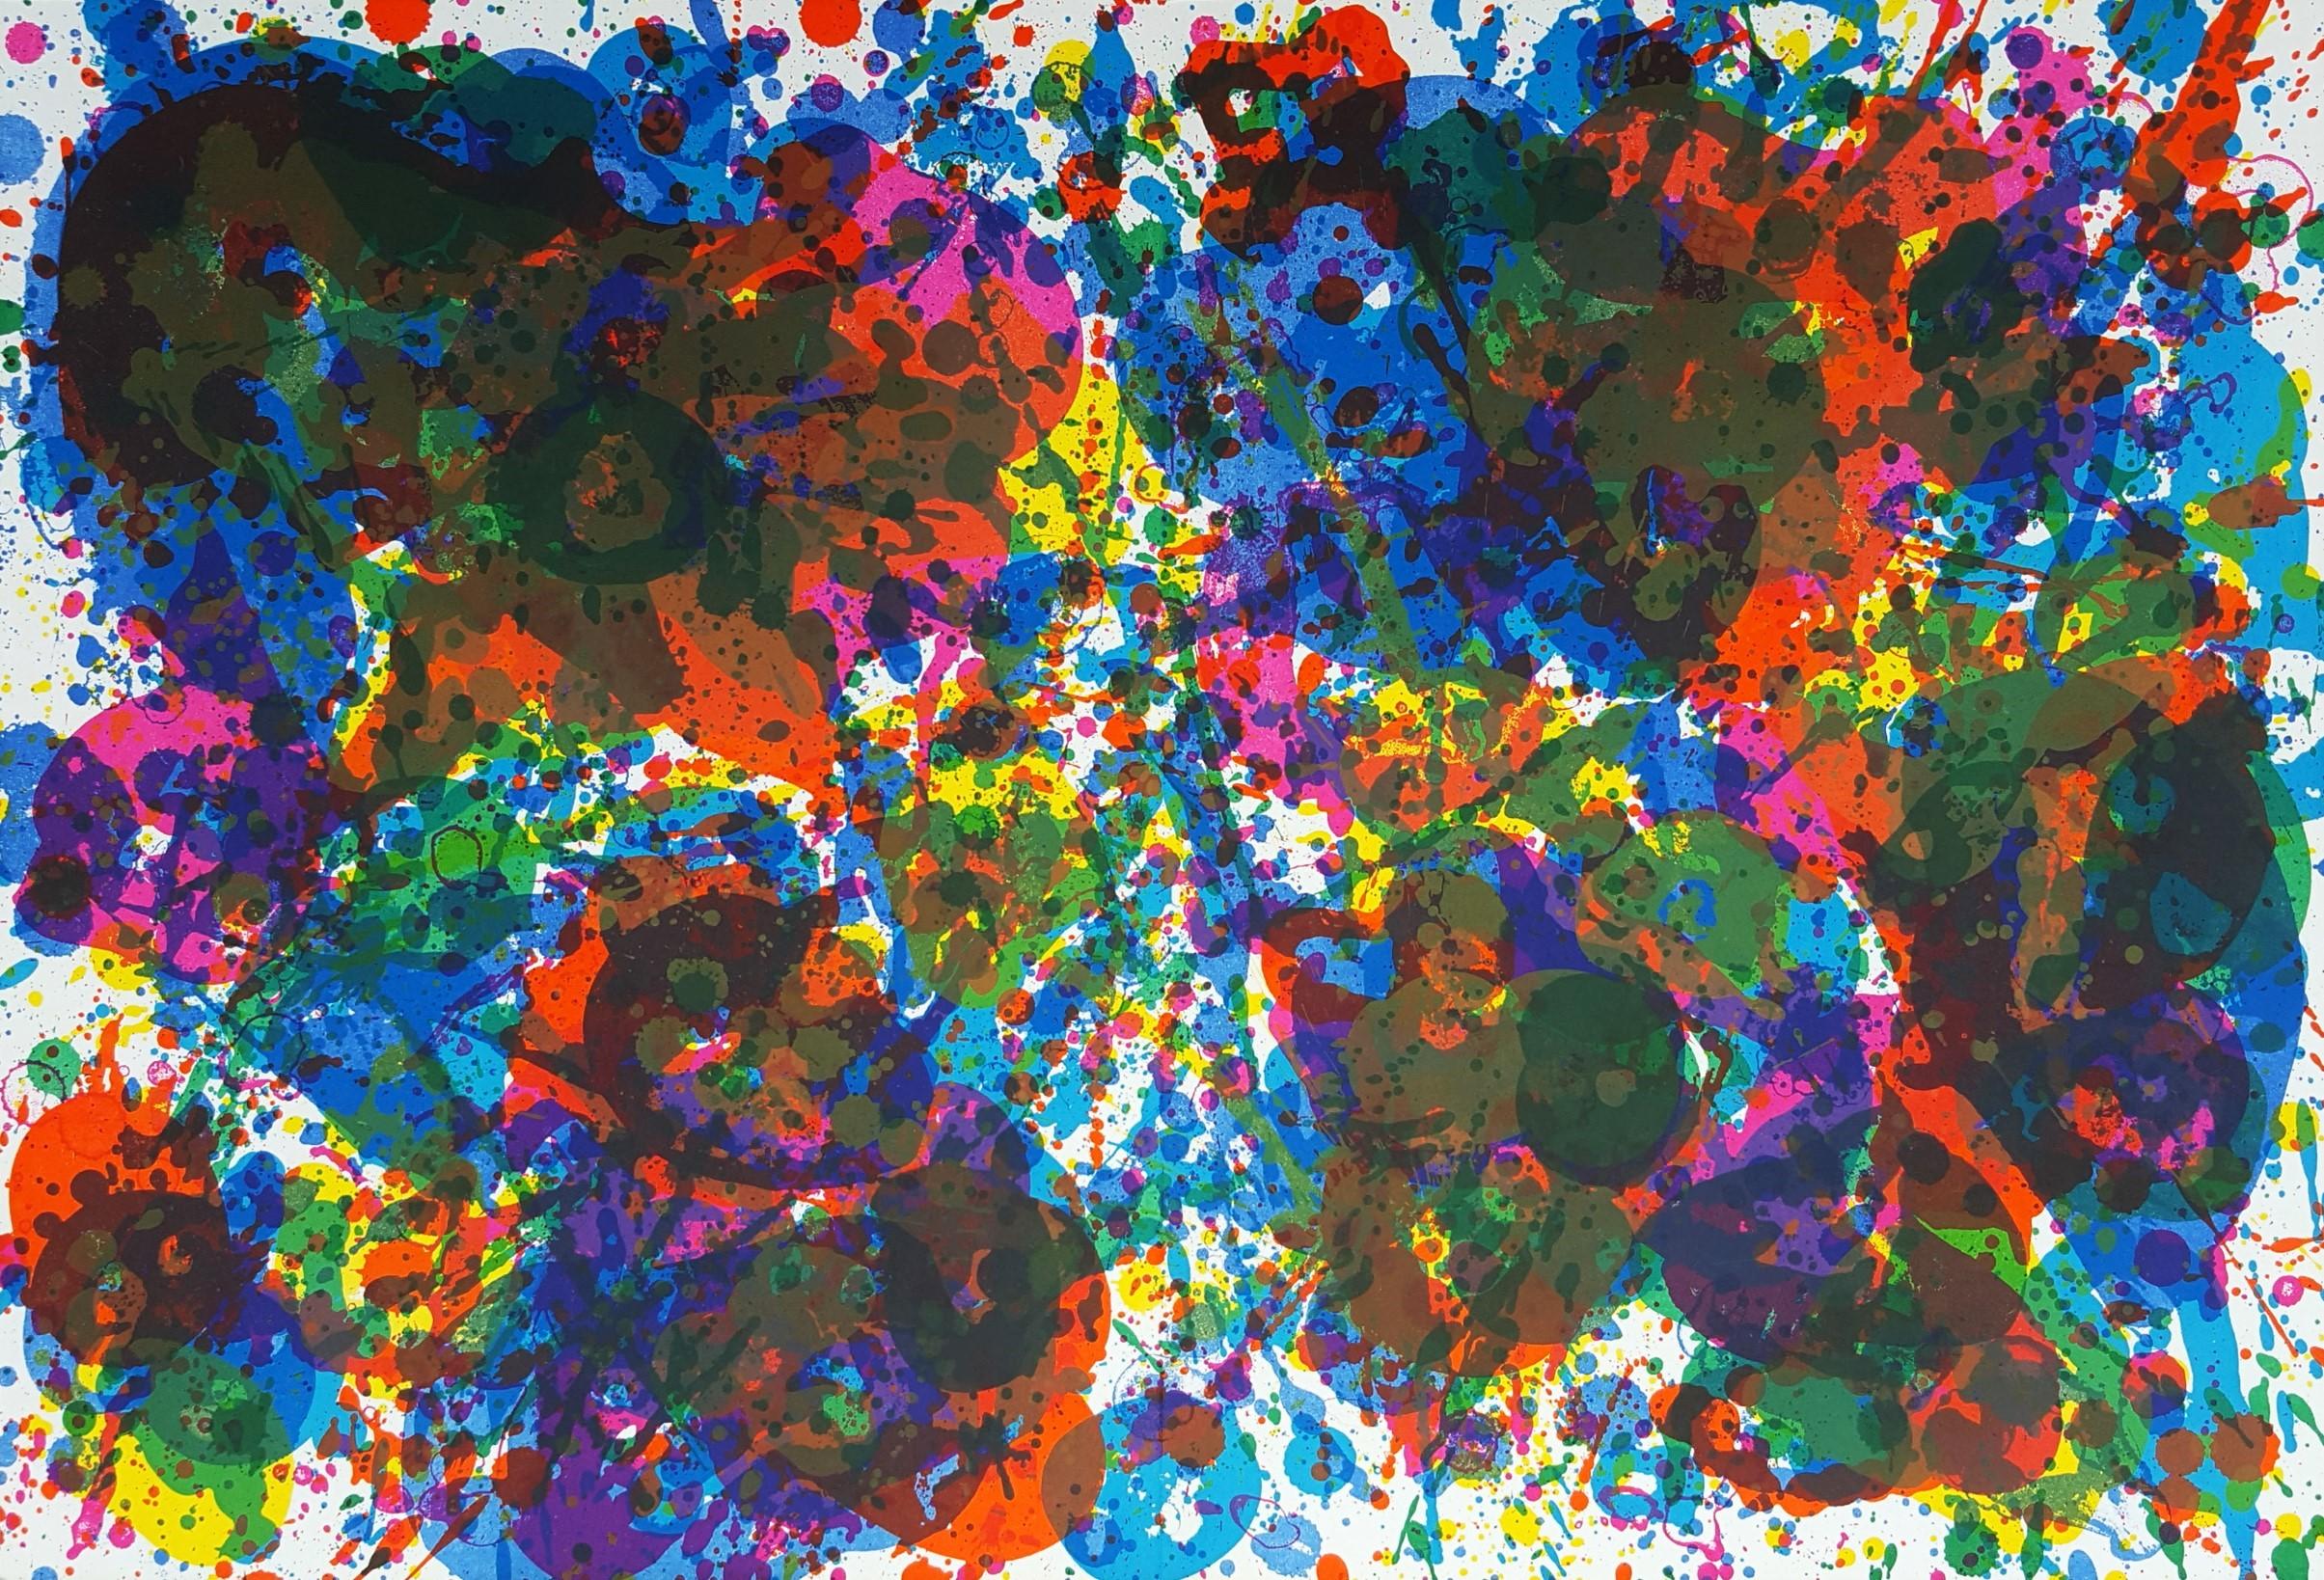 Artist: Sam Francis (American, 1923-1994)
Title: "Untitled (SF-348) (Fresh Air School)"
Portfolio: Fresh Air School
*Unsigned edition
Year: 1972
Medium: Original Offset-Lithograph on white wove paper
Limited edition: 6,000, (there was also a signed